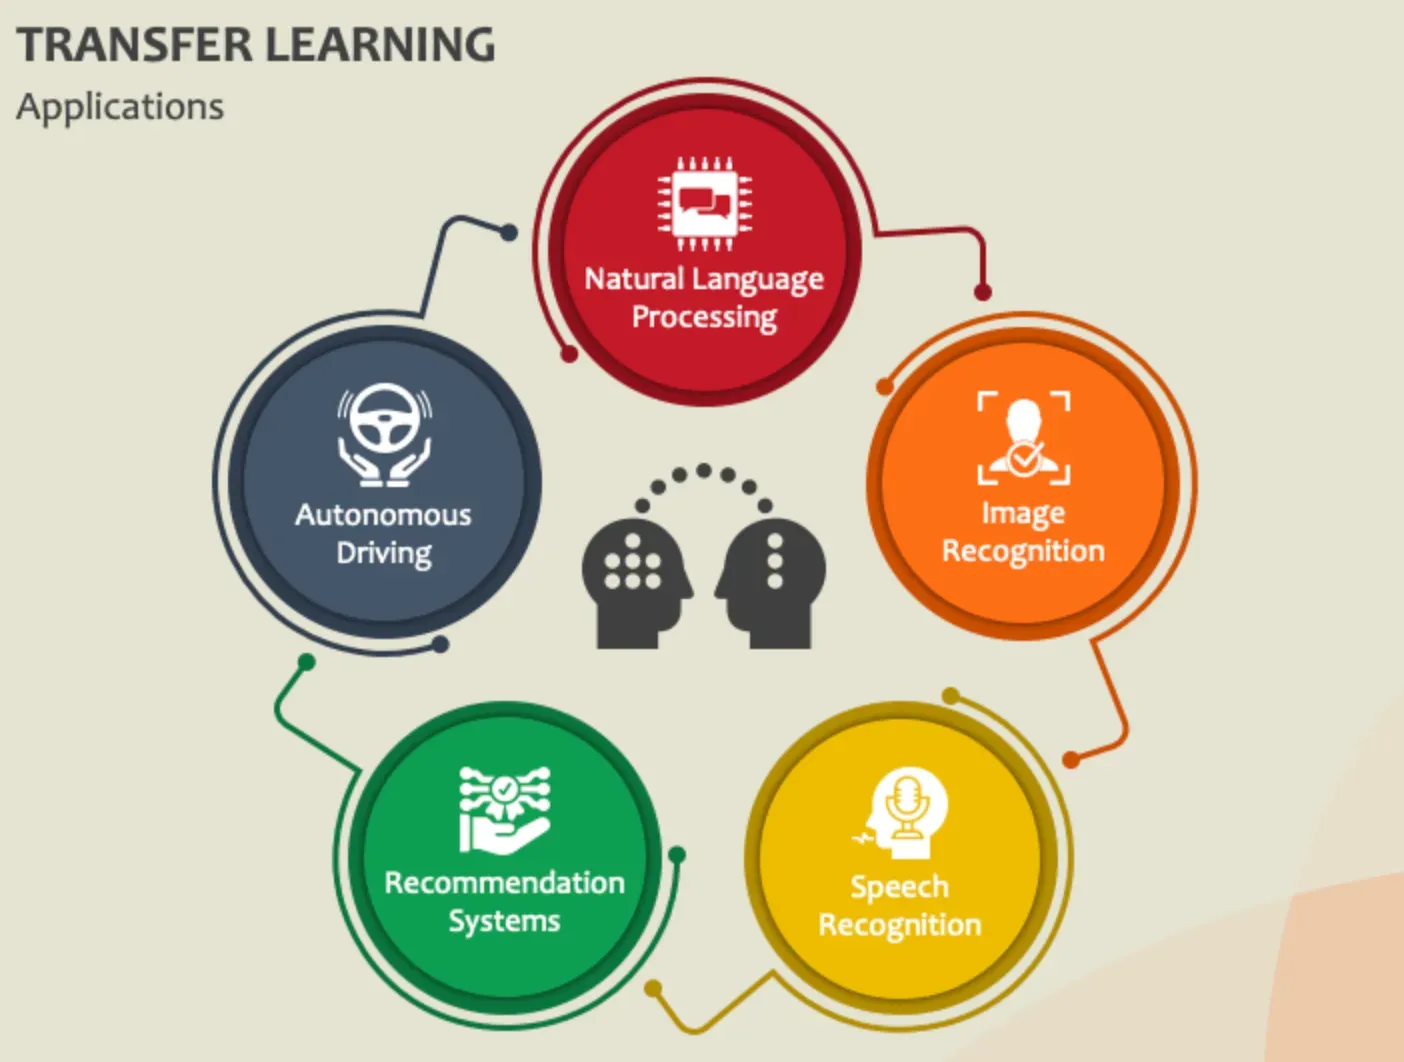 Applications of Transfer Learning